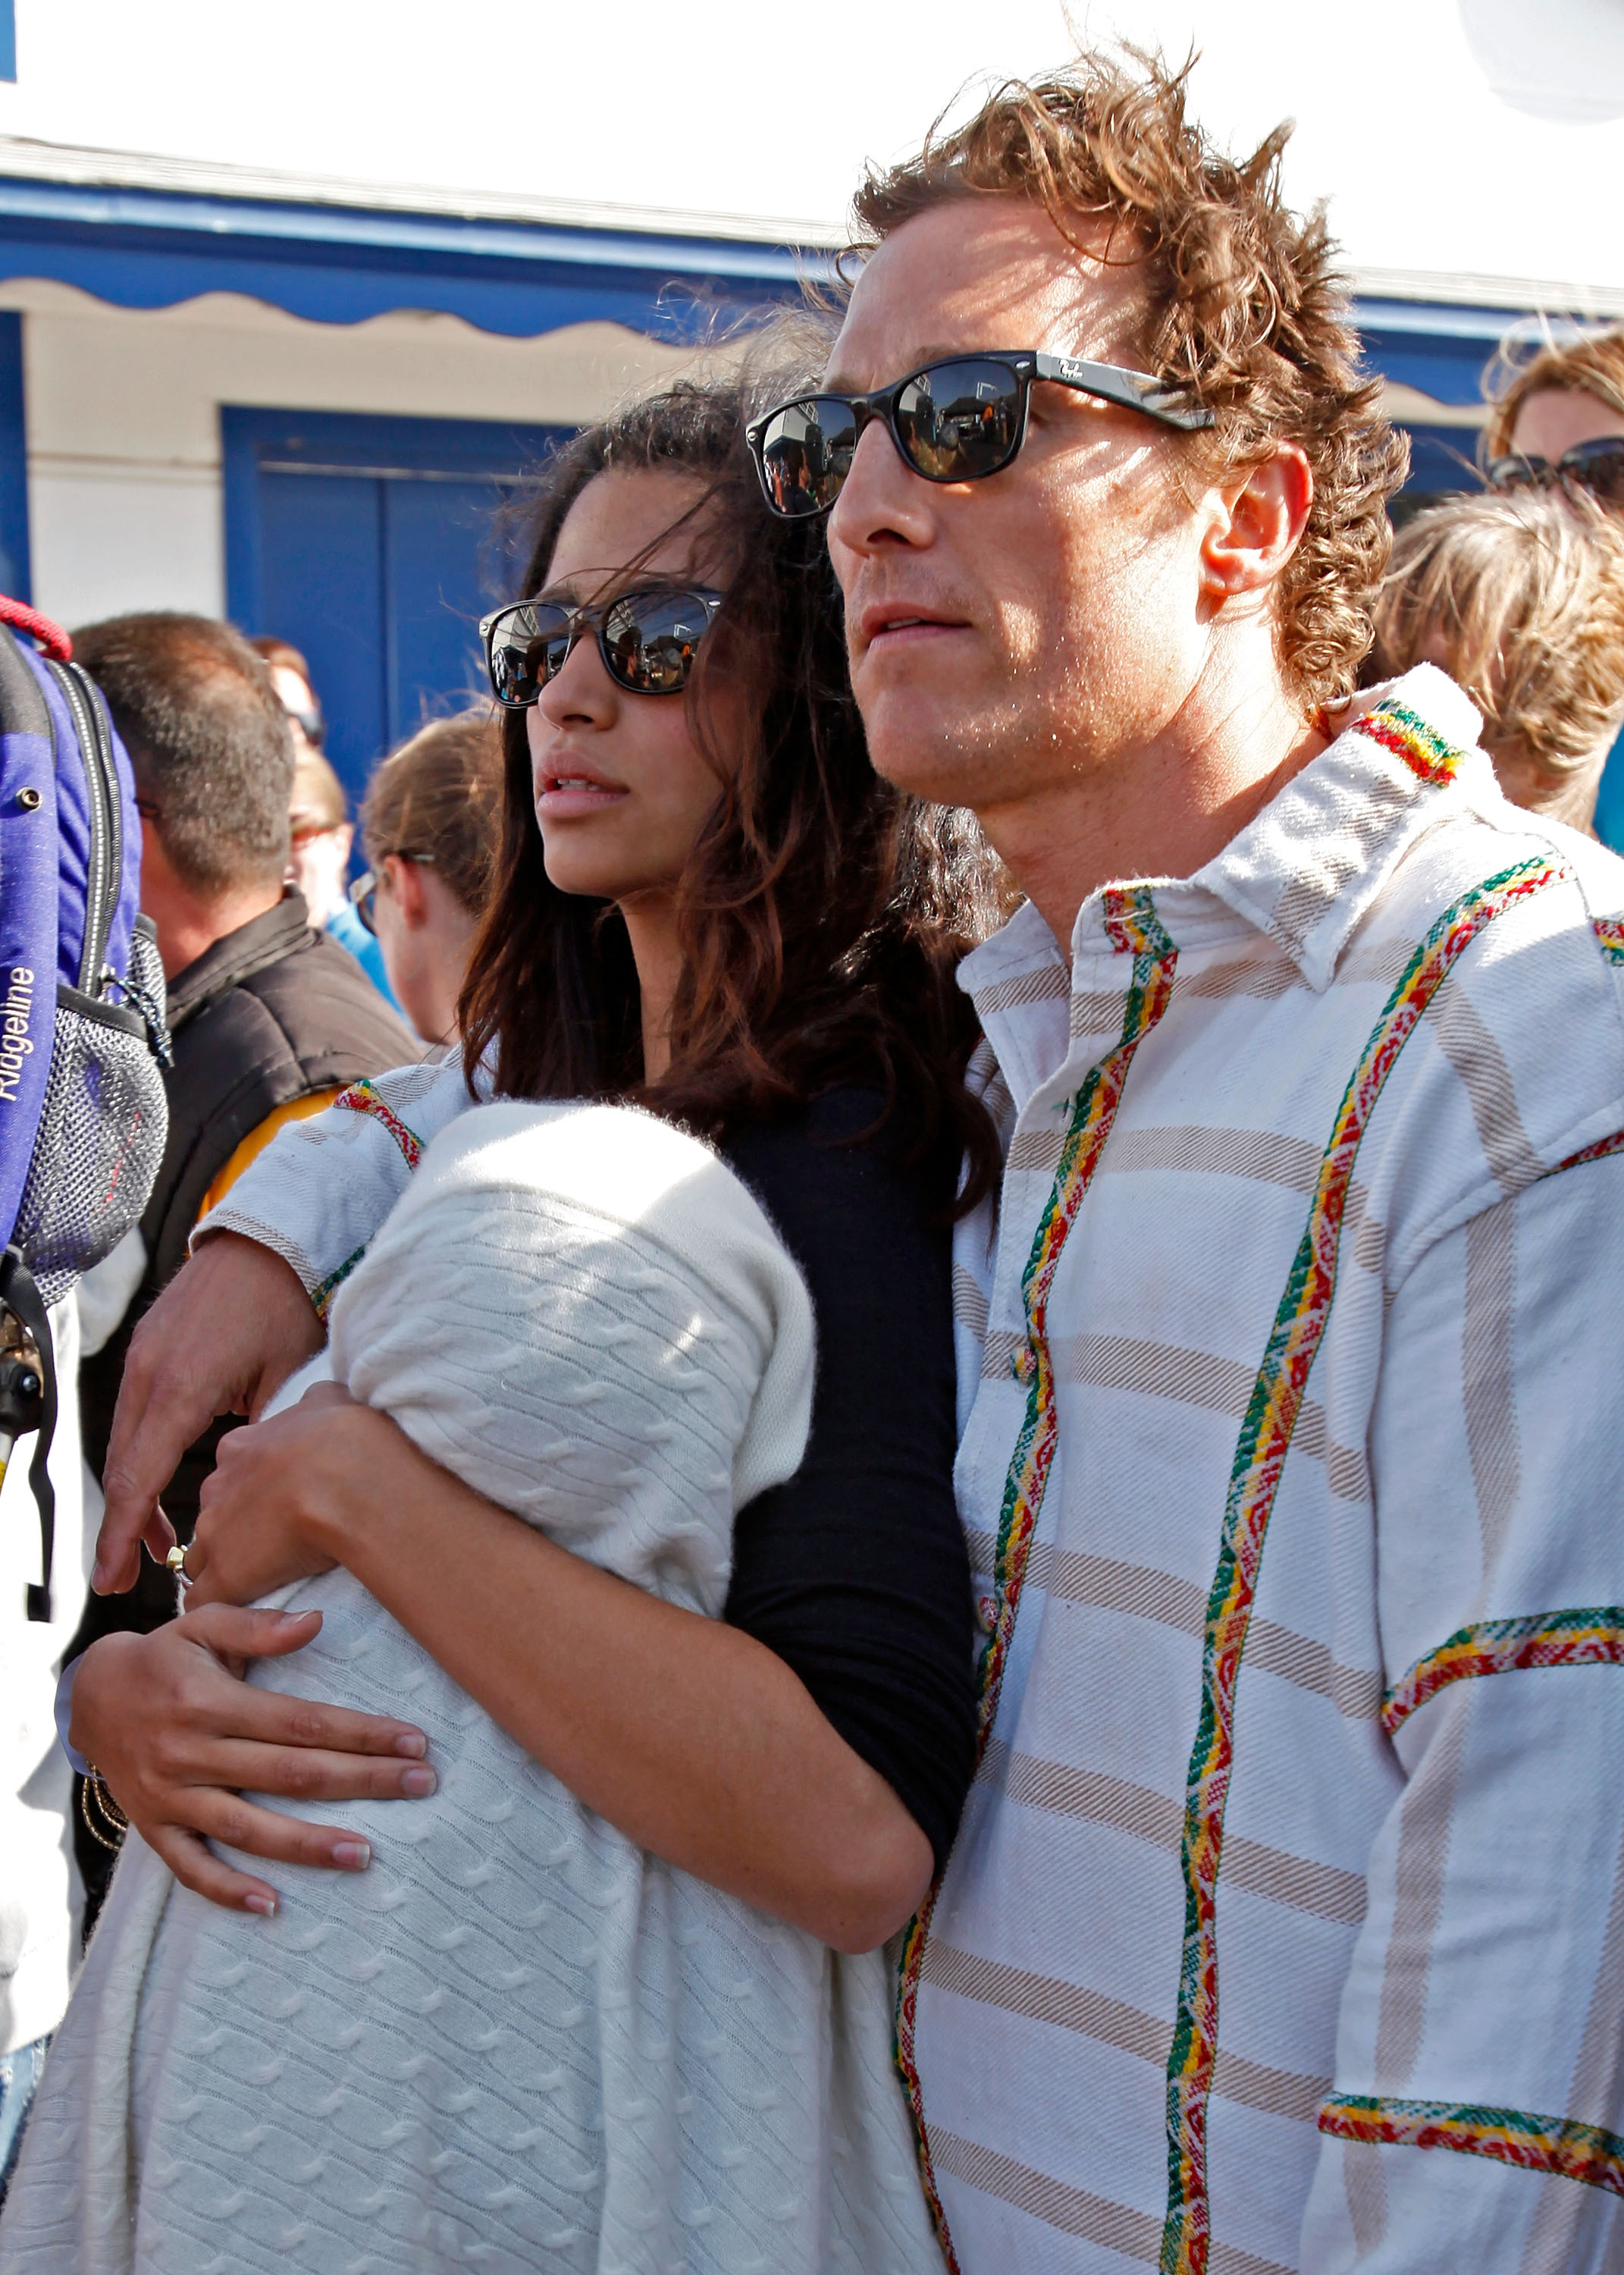 Camila, Levi and Matthew McConaughey at the MaliBLUE Art & Music Festival in Malibu, California on April 26, 2009 | Source: Getty Images